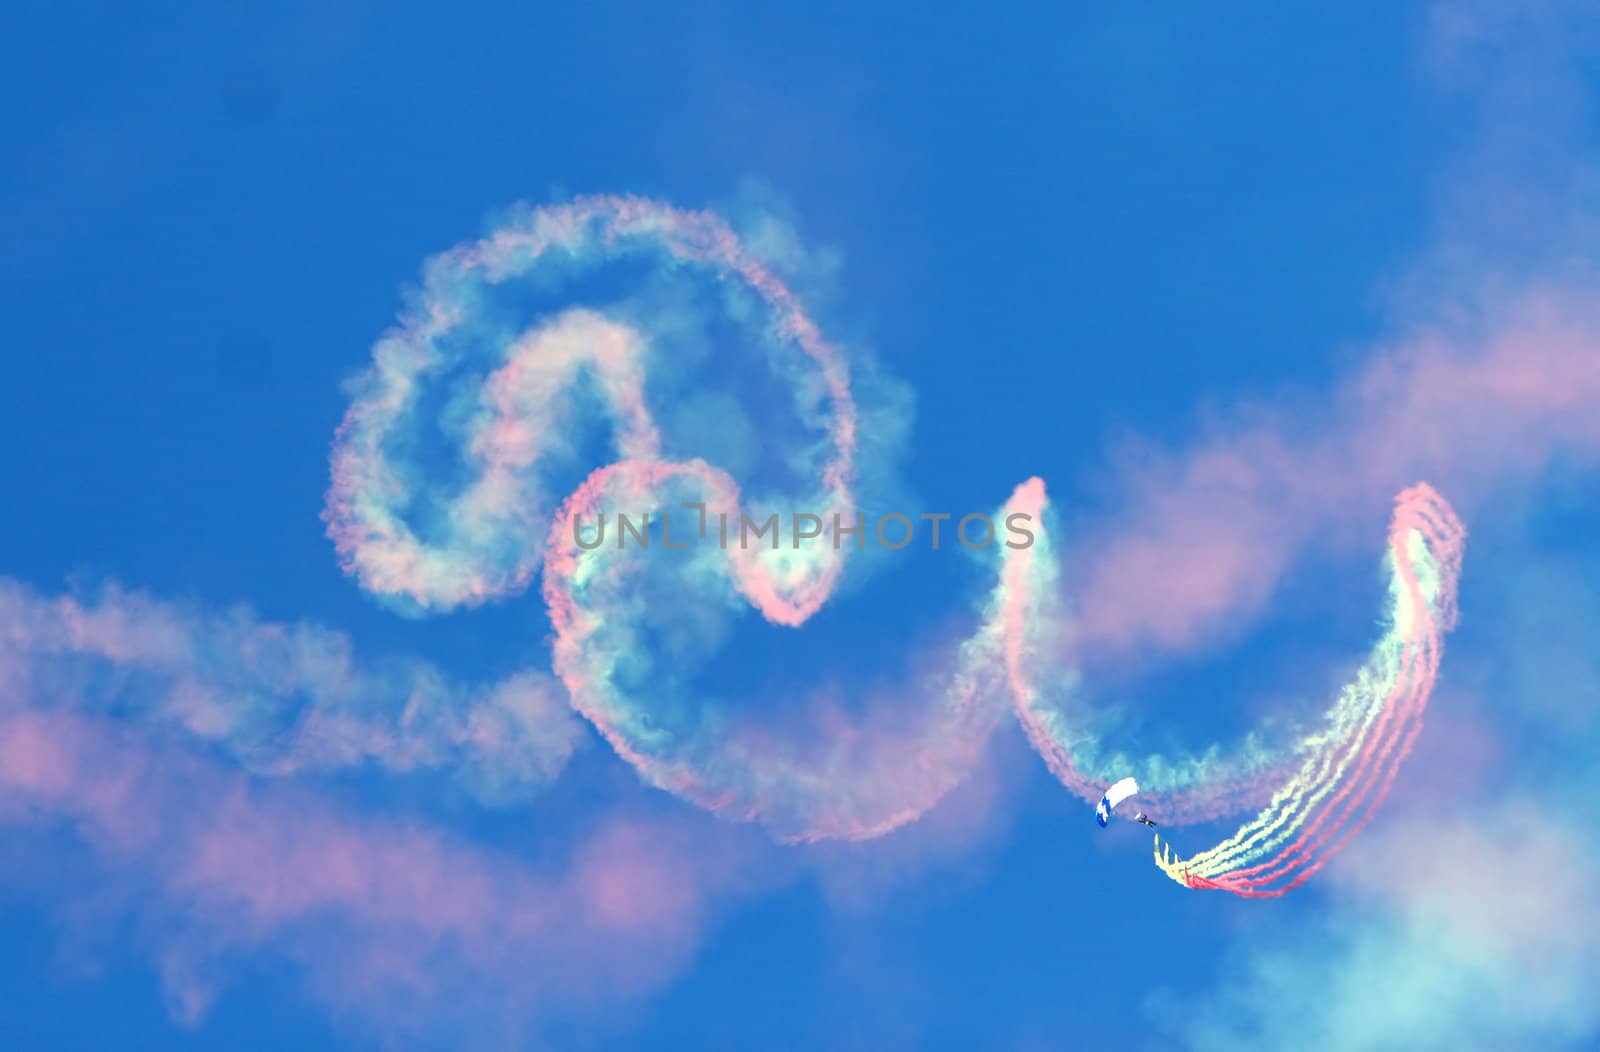 A parachute jumper with smoke canisters leaves a colorful trail in the blue sky